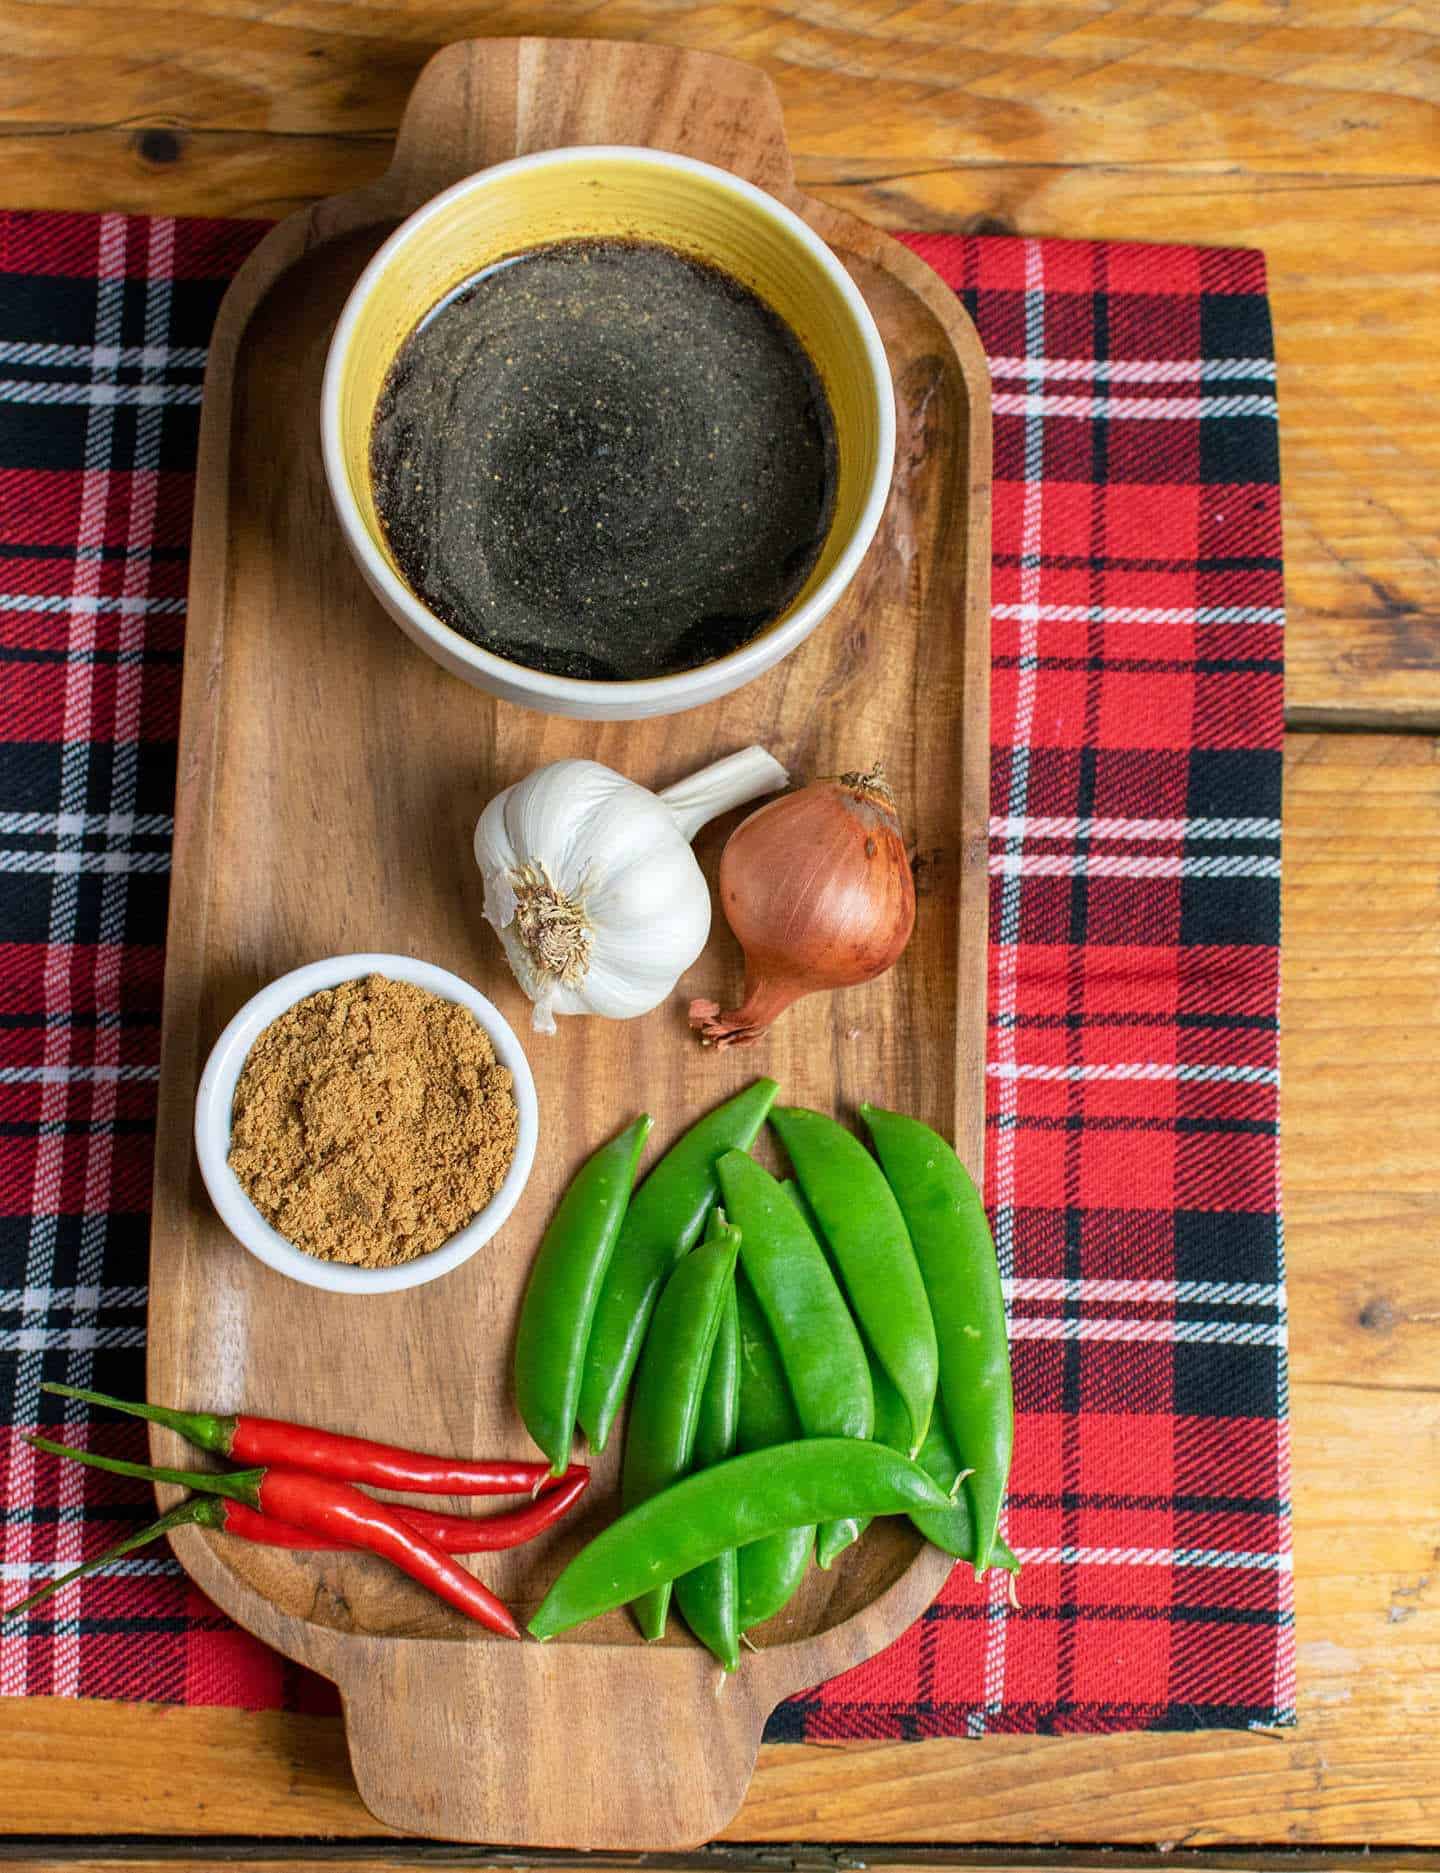 Ingredients laid out on a wooden try, including sauce, sugar, garlic, onion, sugar snap peas and chillies